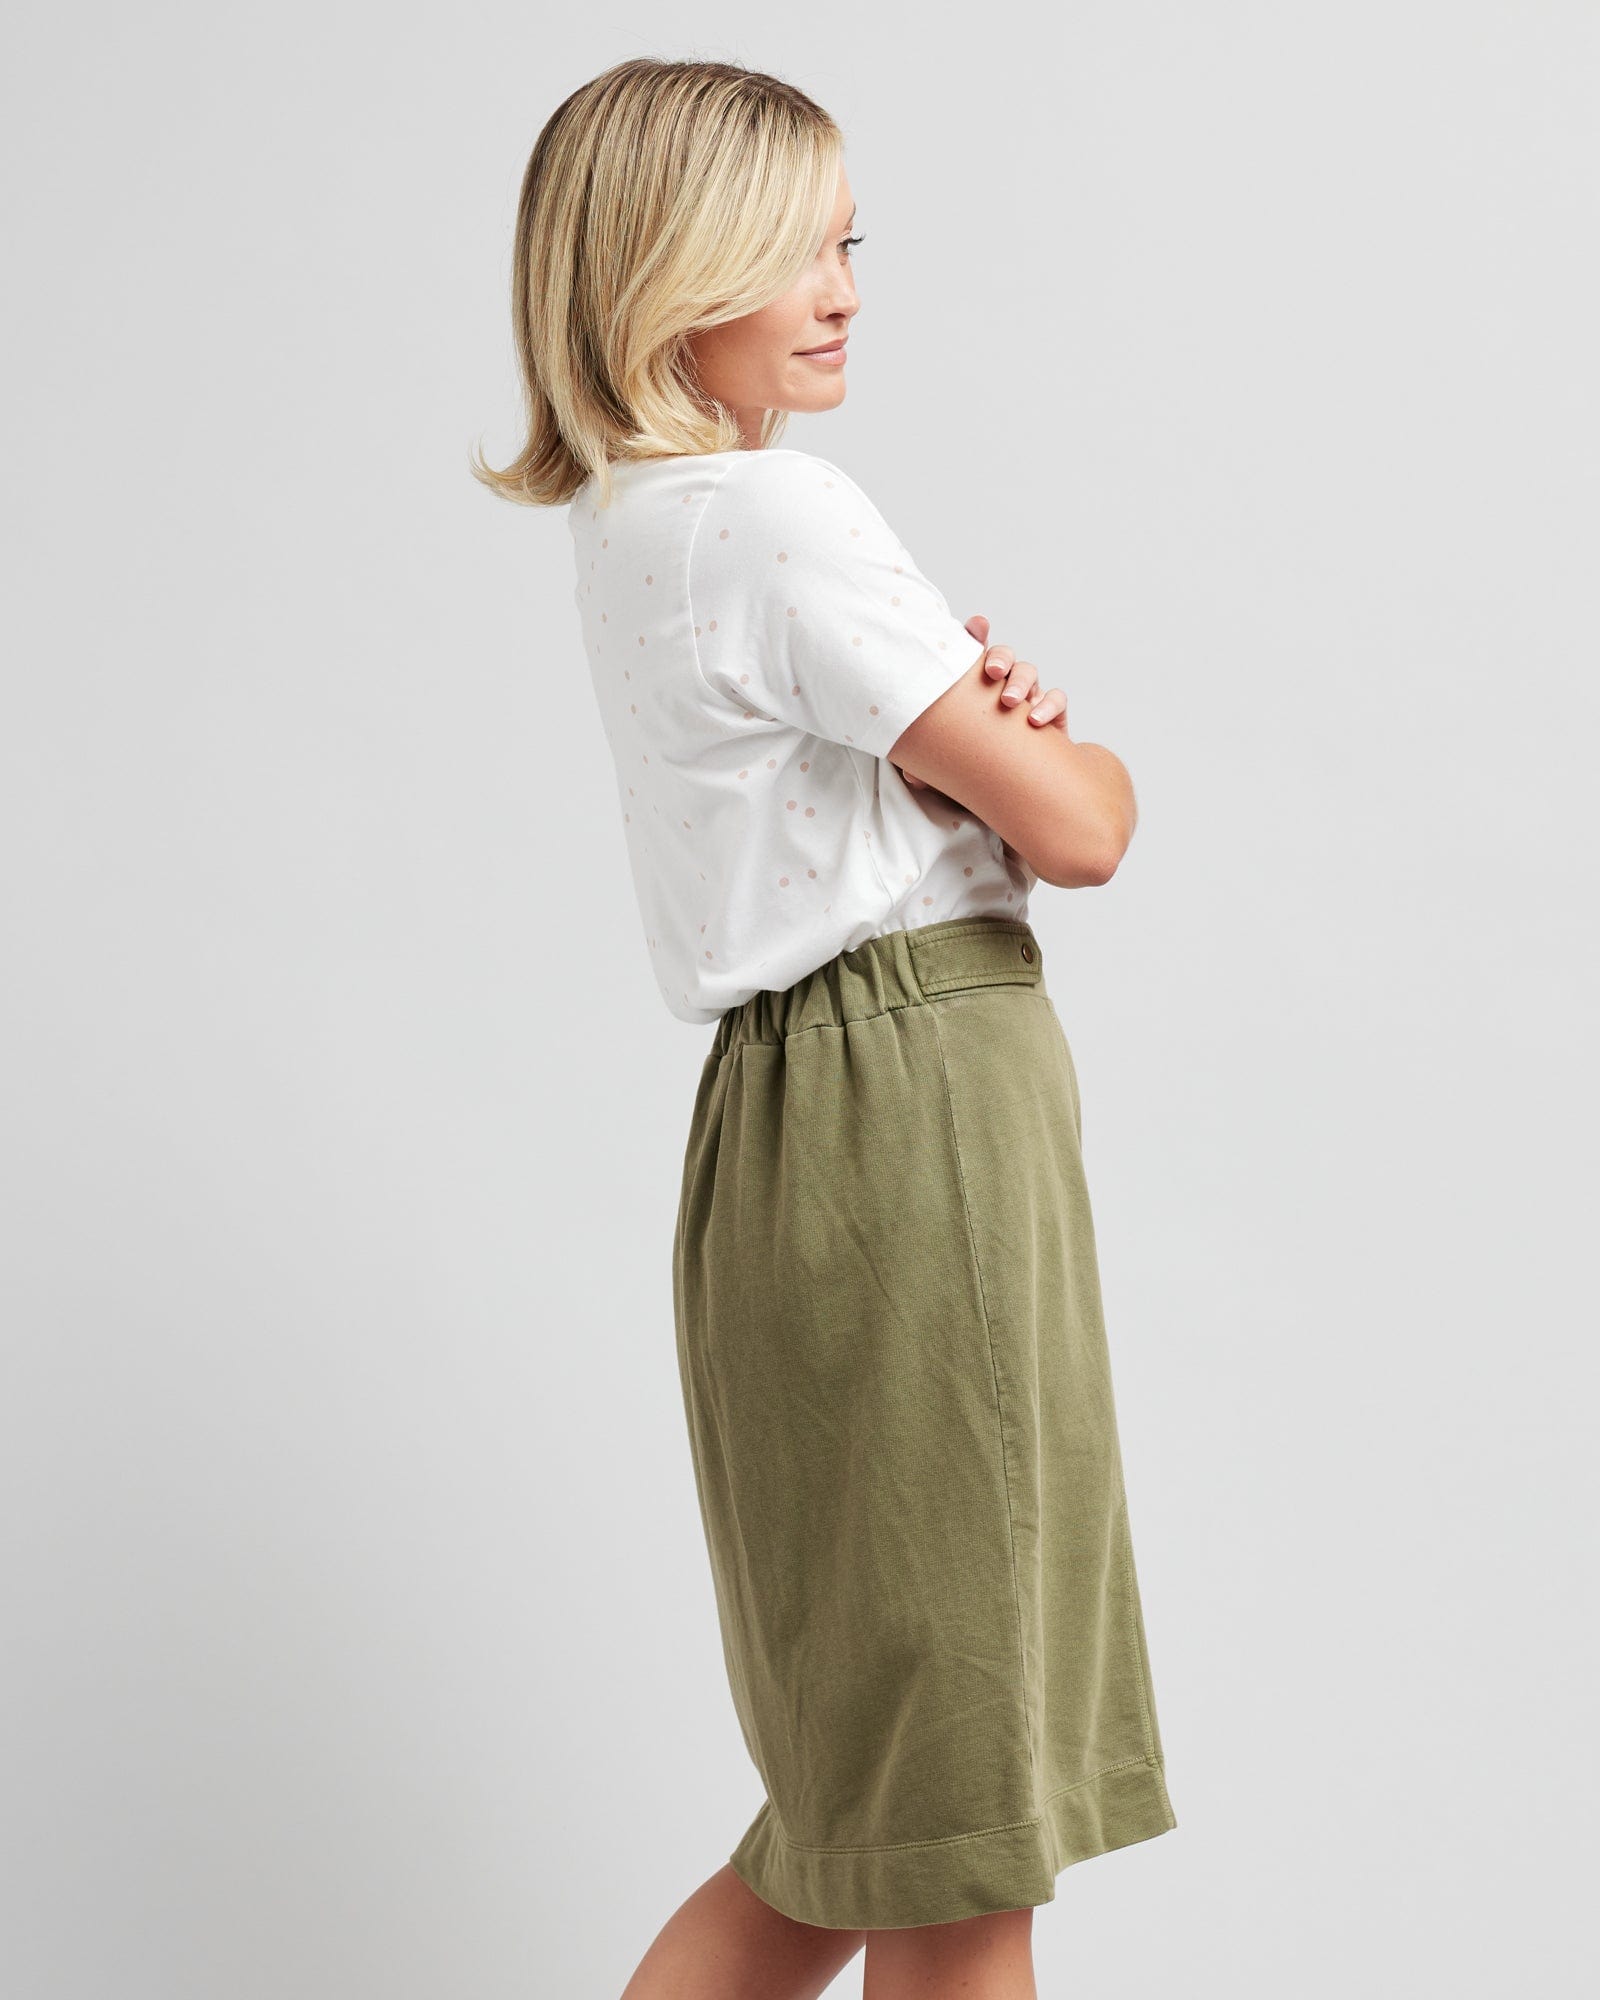 Woman in a green knee-length skirt